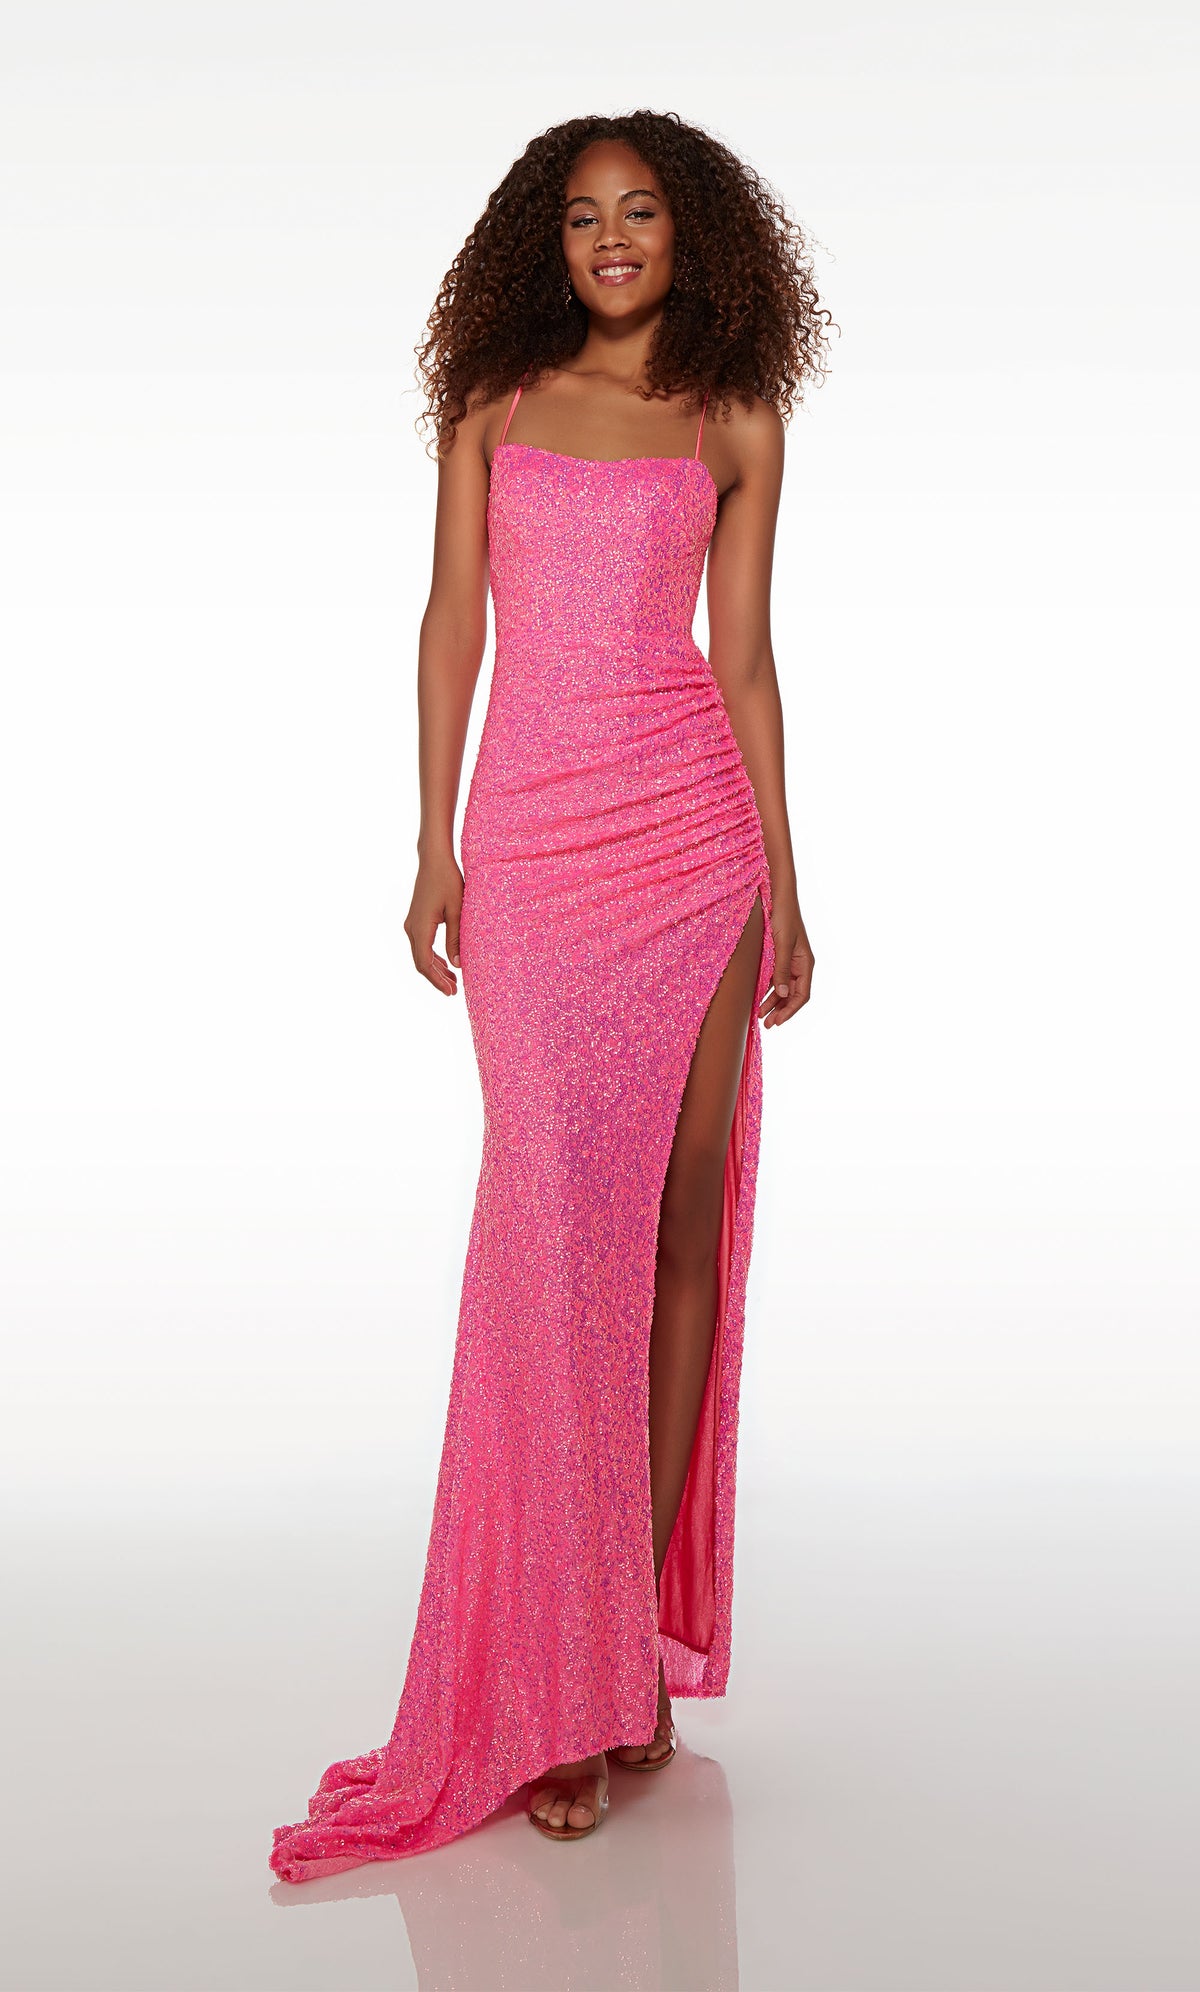 Square-neck pink prom dress with ruching detail, side slit, strappy open back, and an stylish train in pink sequins.